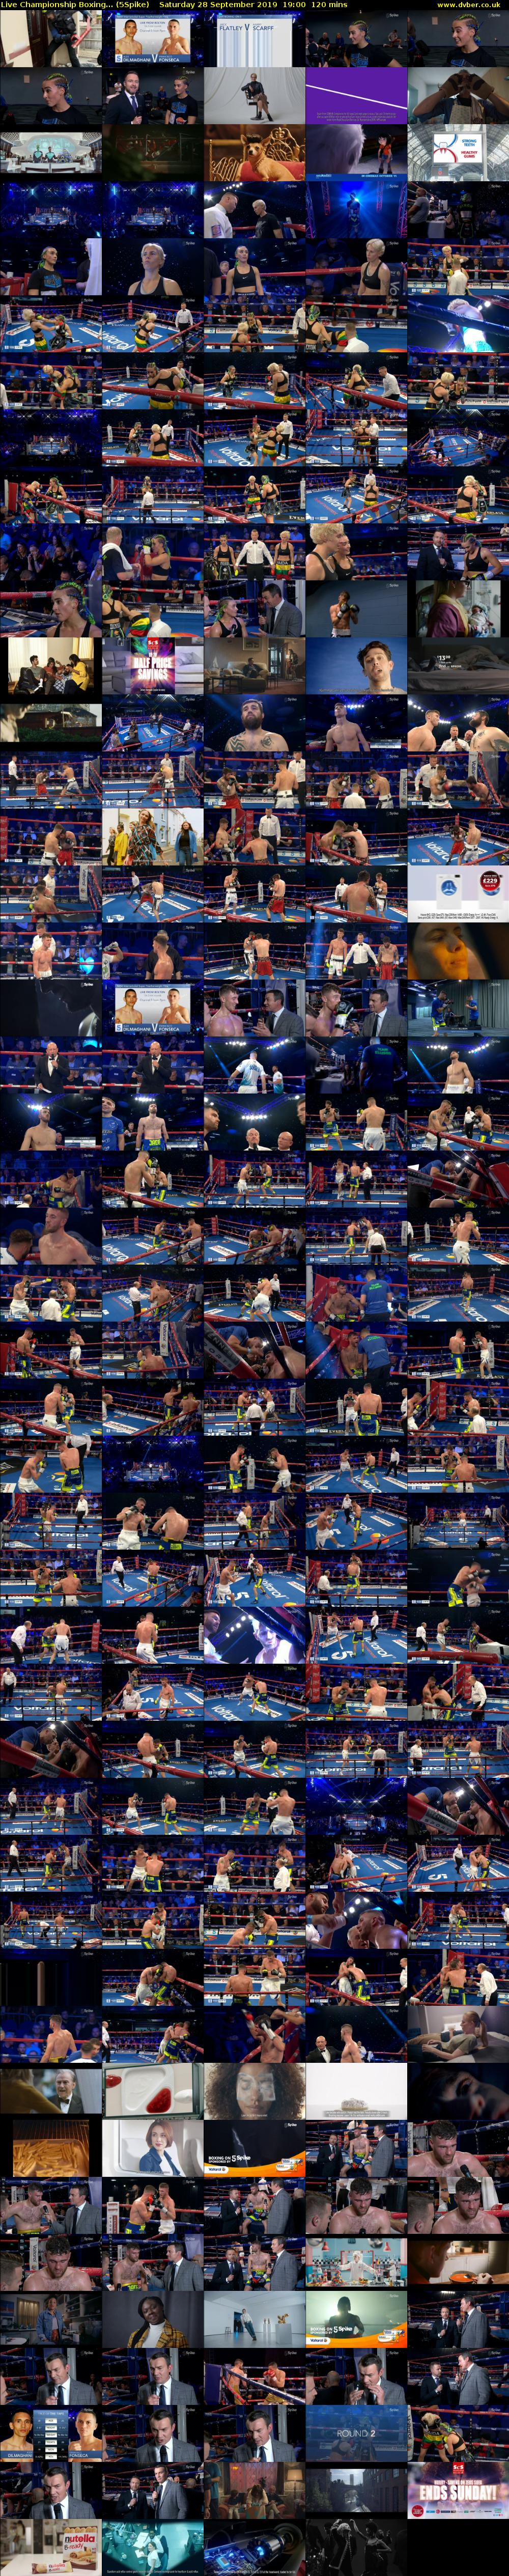 Live Championship Boxing... (5Spike) Saturday 28 September 2019 19:00 - 21:00